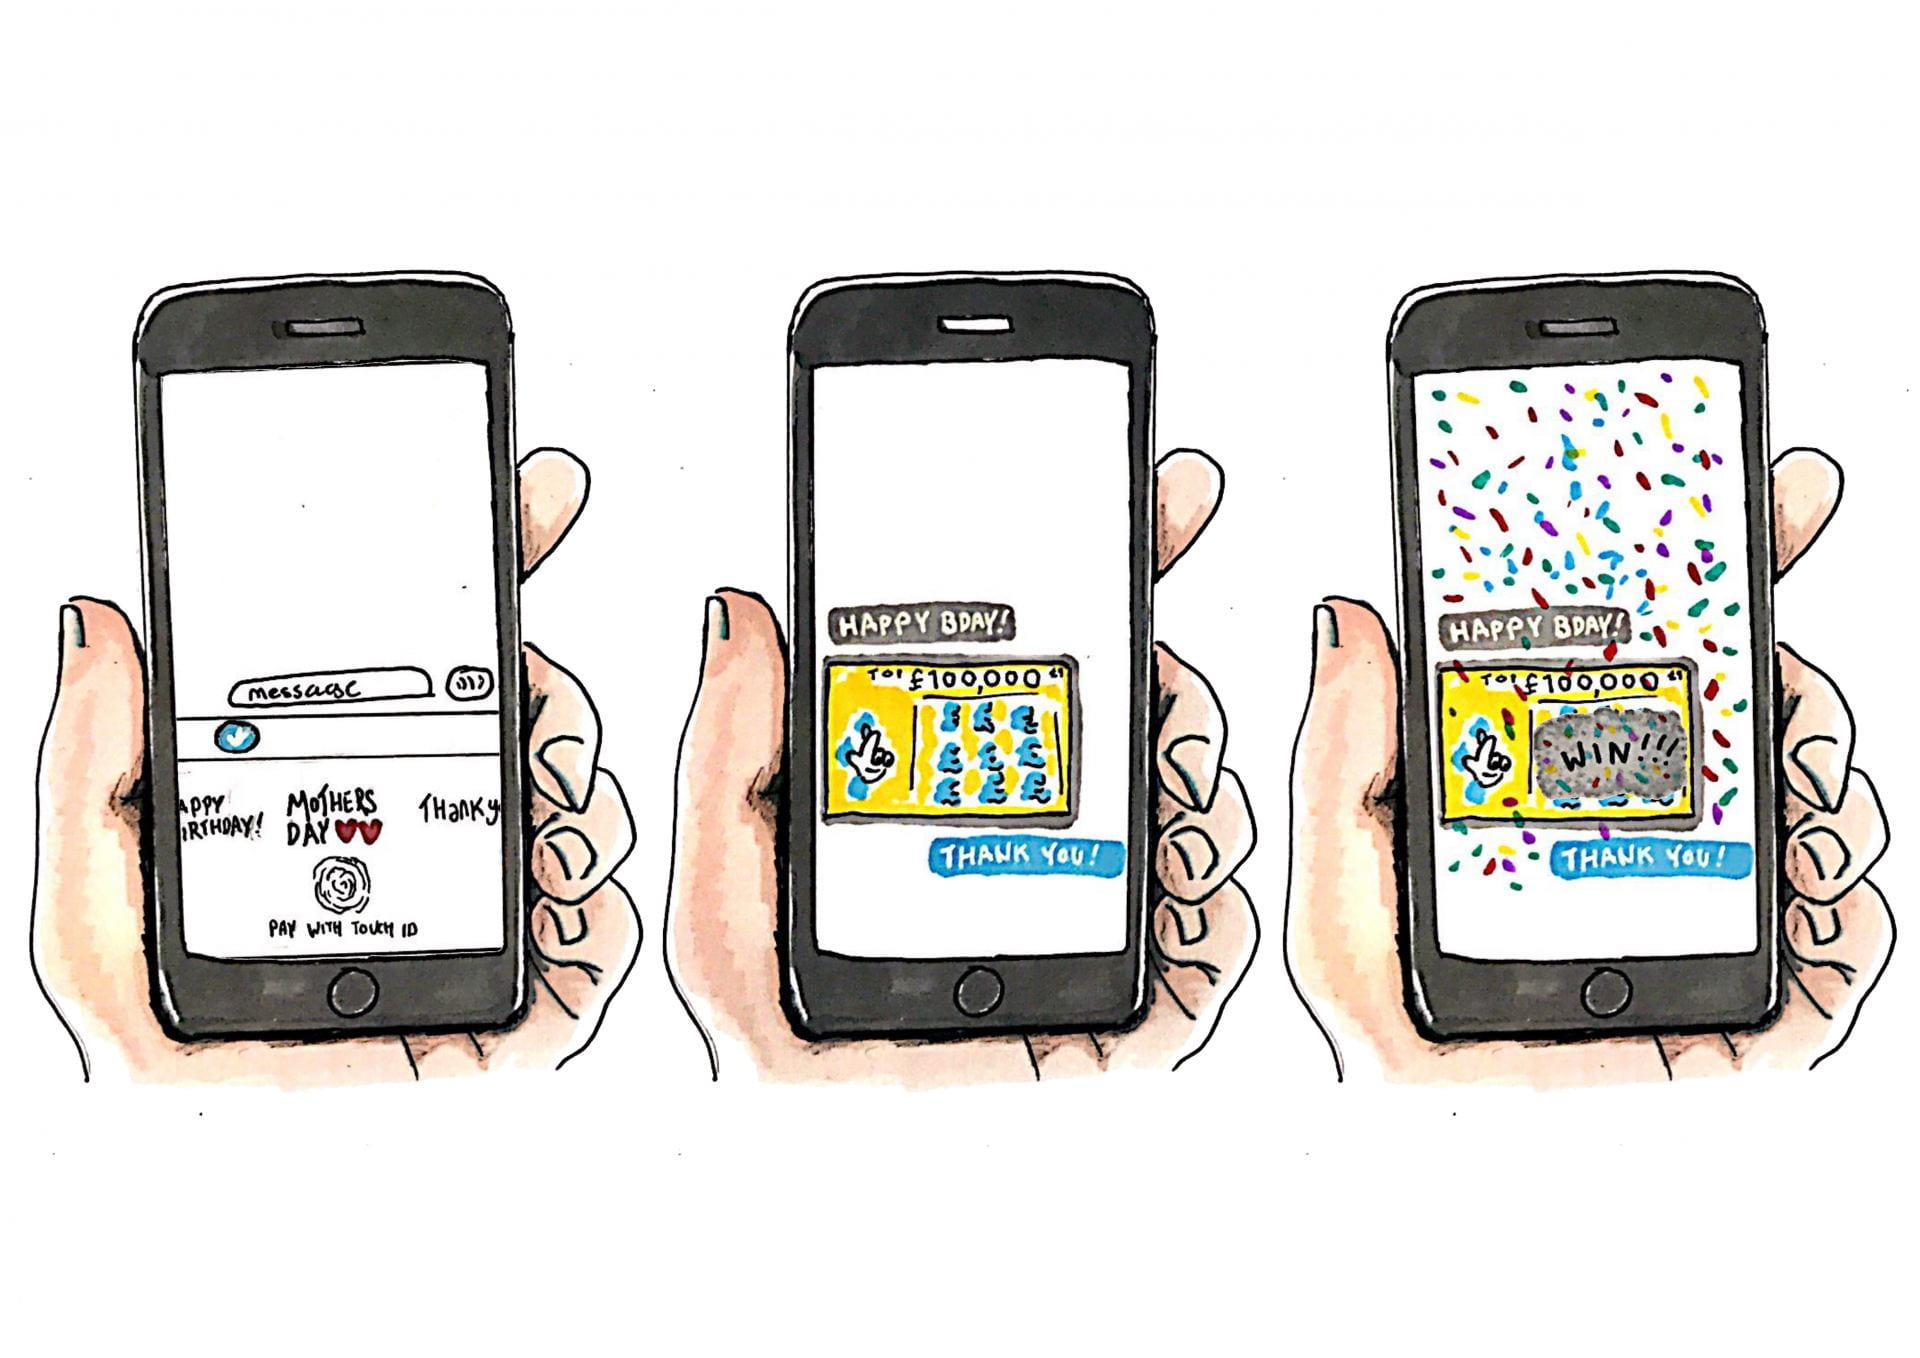 Illustration of a digital feature allowing you to send themed scratchcards over text message.